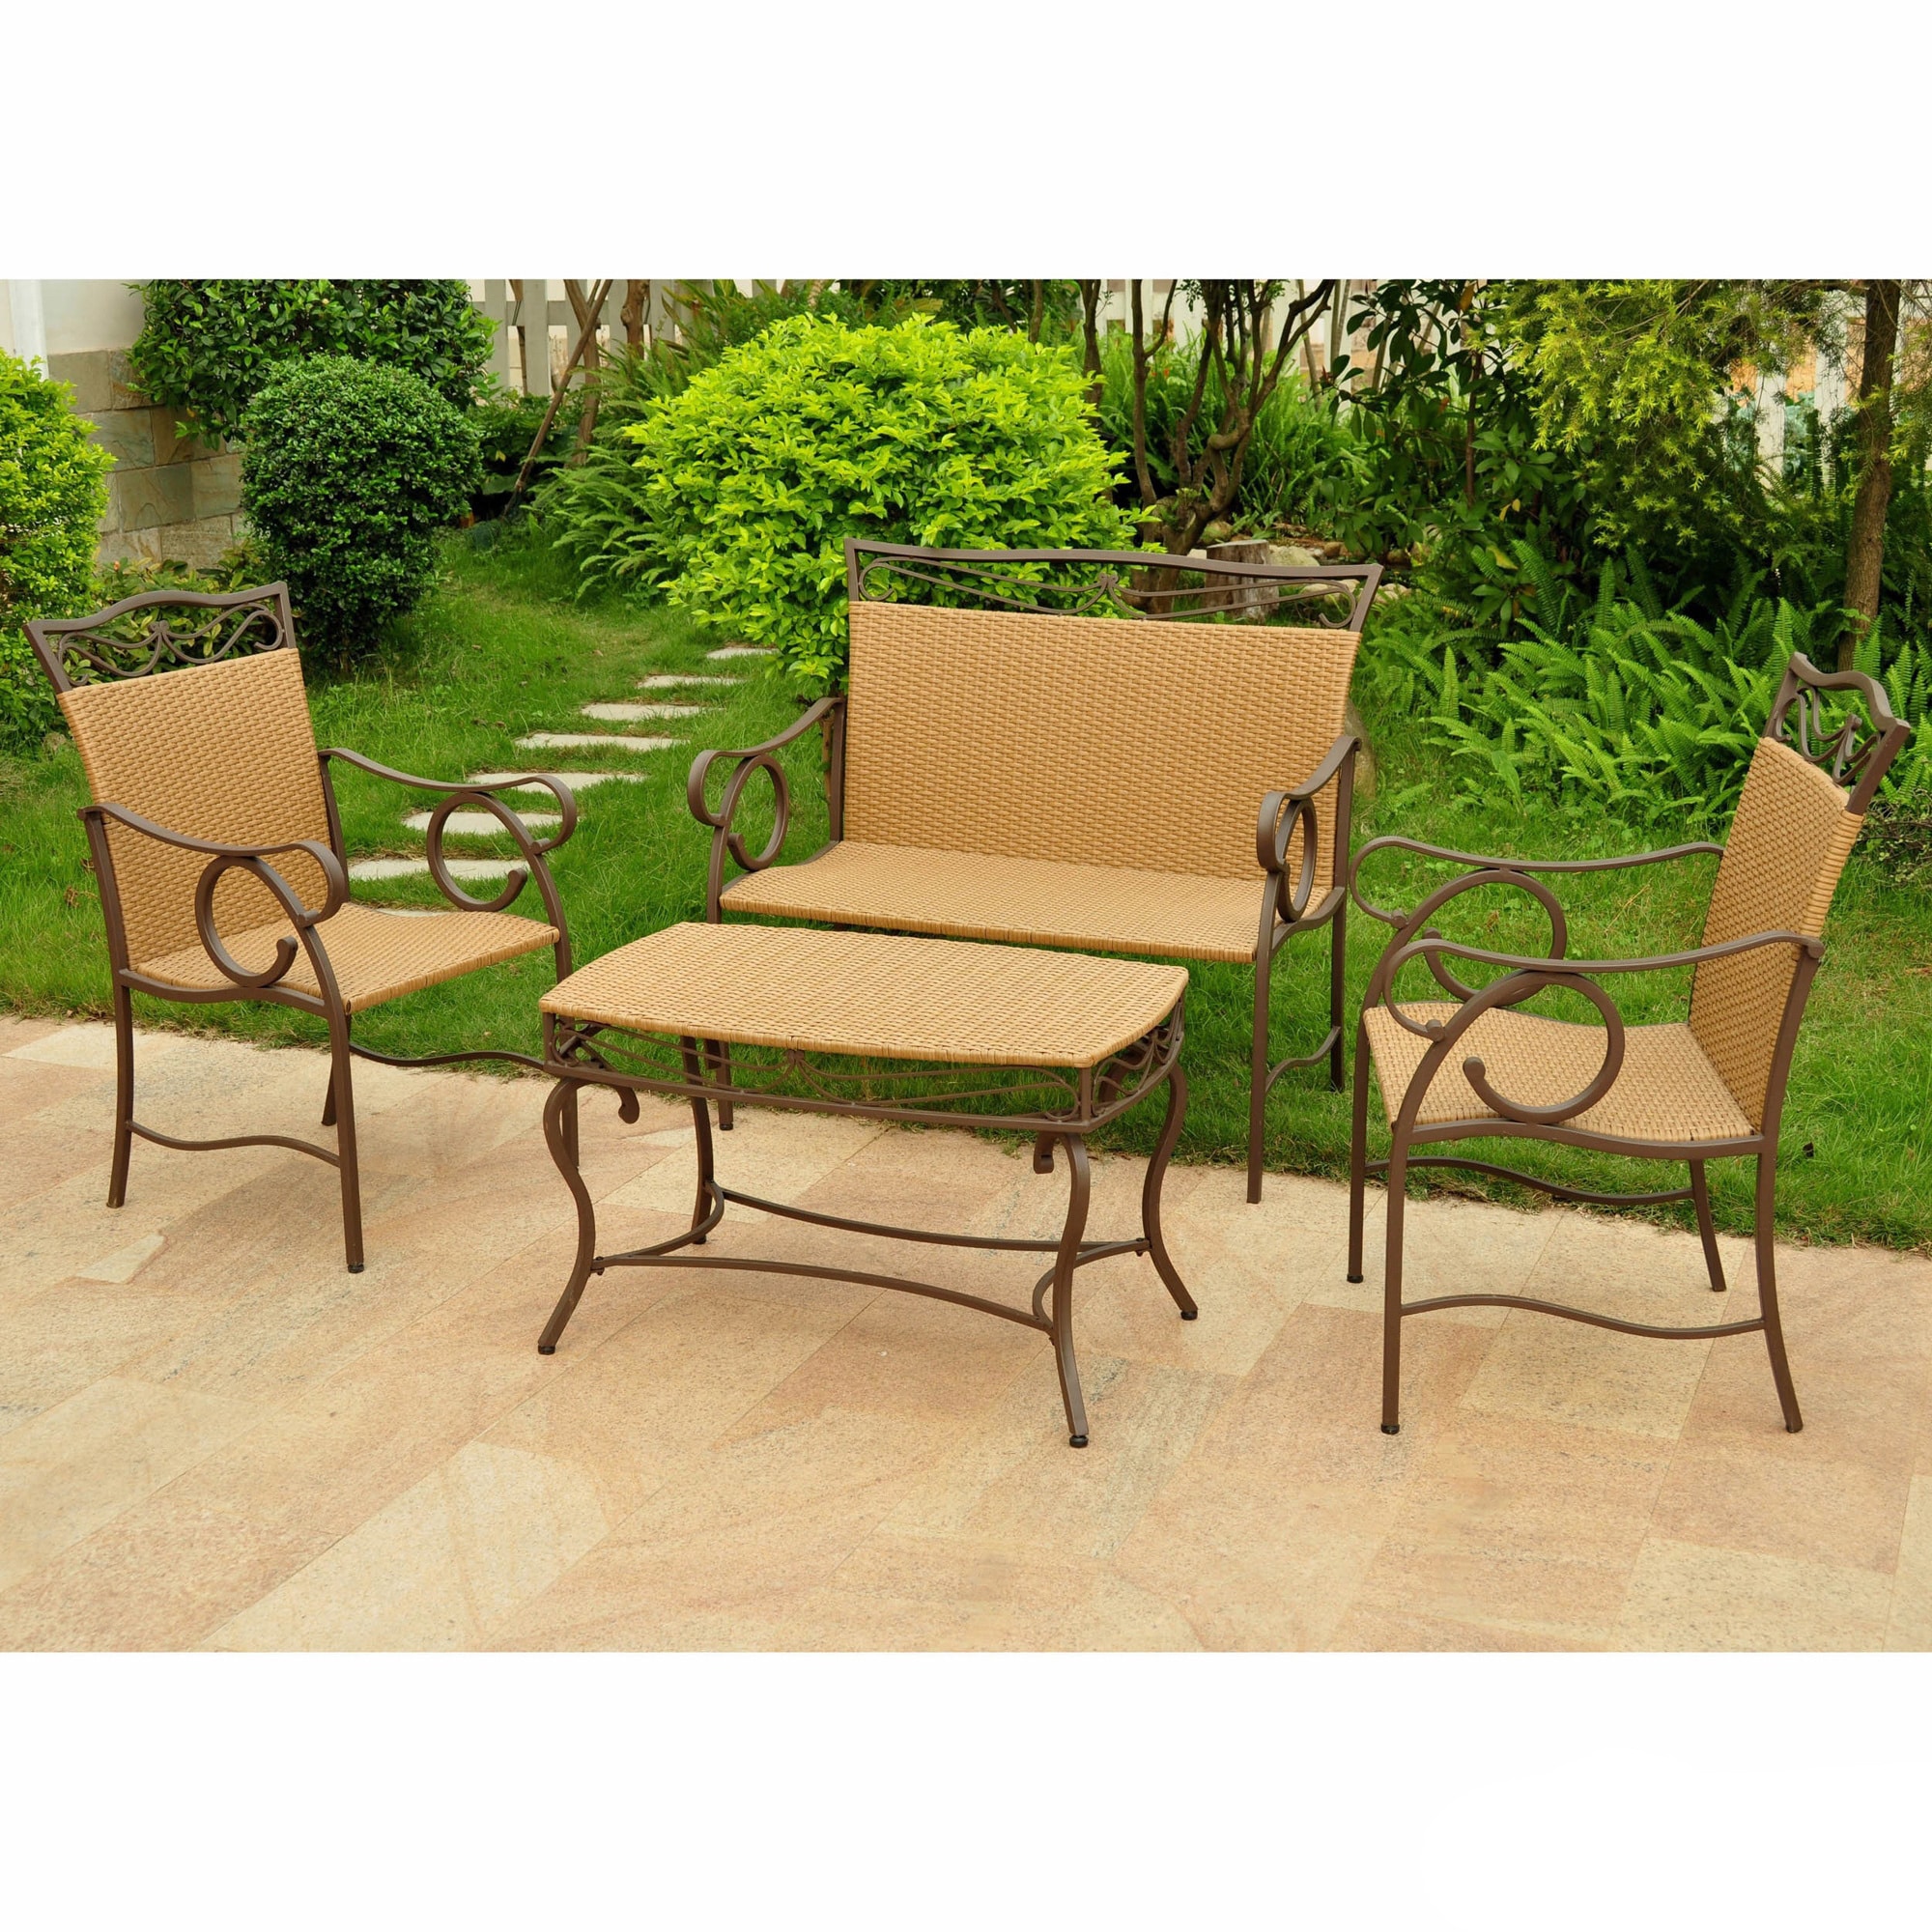 International Caravan International Caravan Valencia Resin Wicker/ Steel 4 piece Outdoor Table Set Brown Size 4 Piece Sets